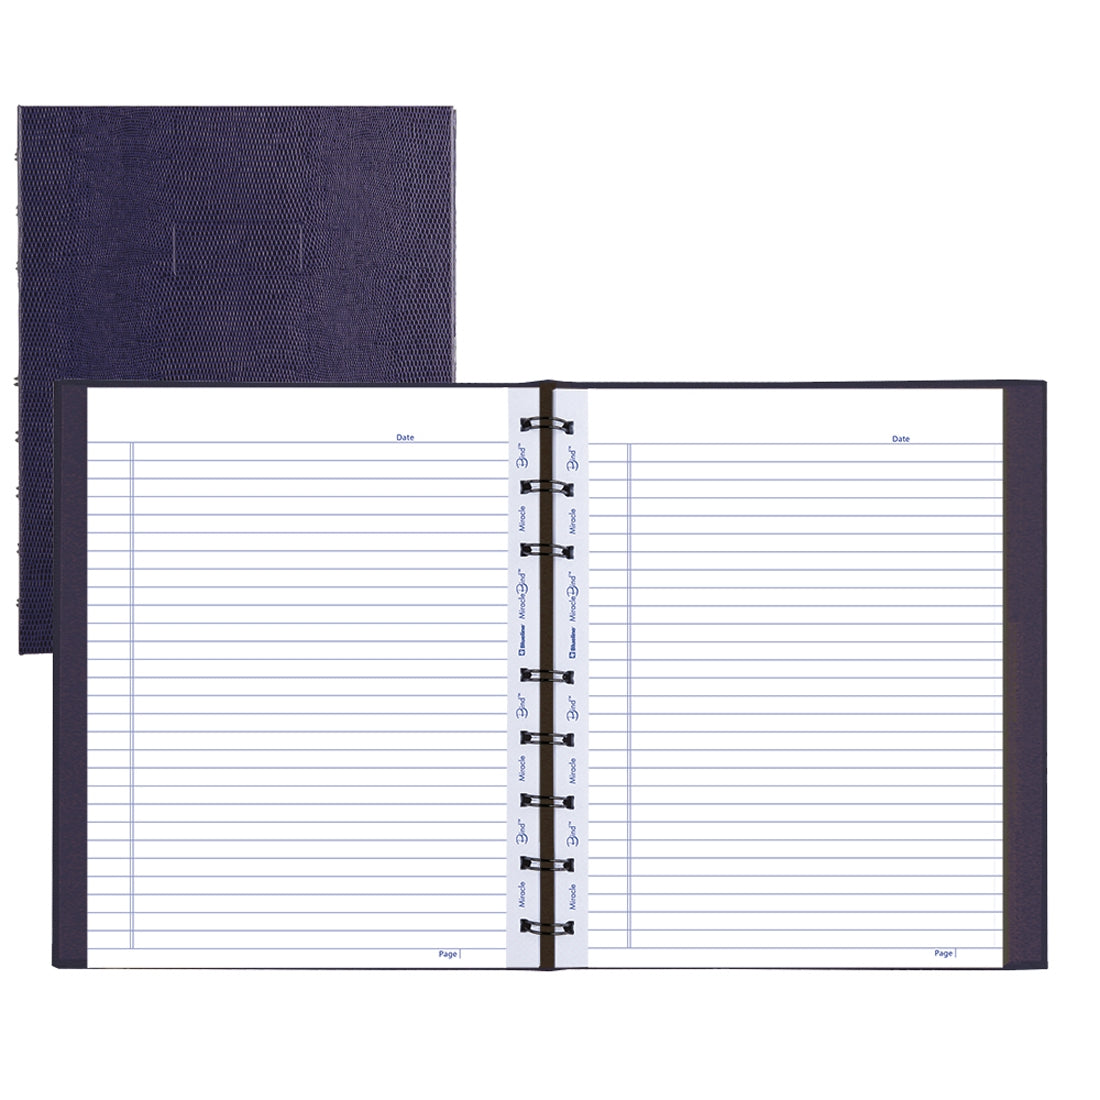 MiracleBind Notebook#color_purple